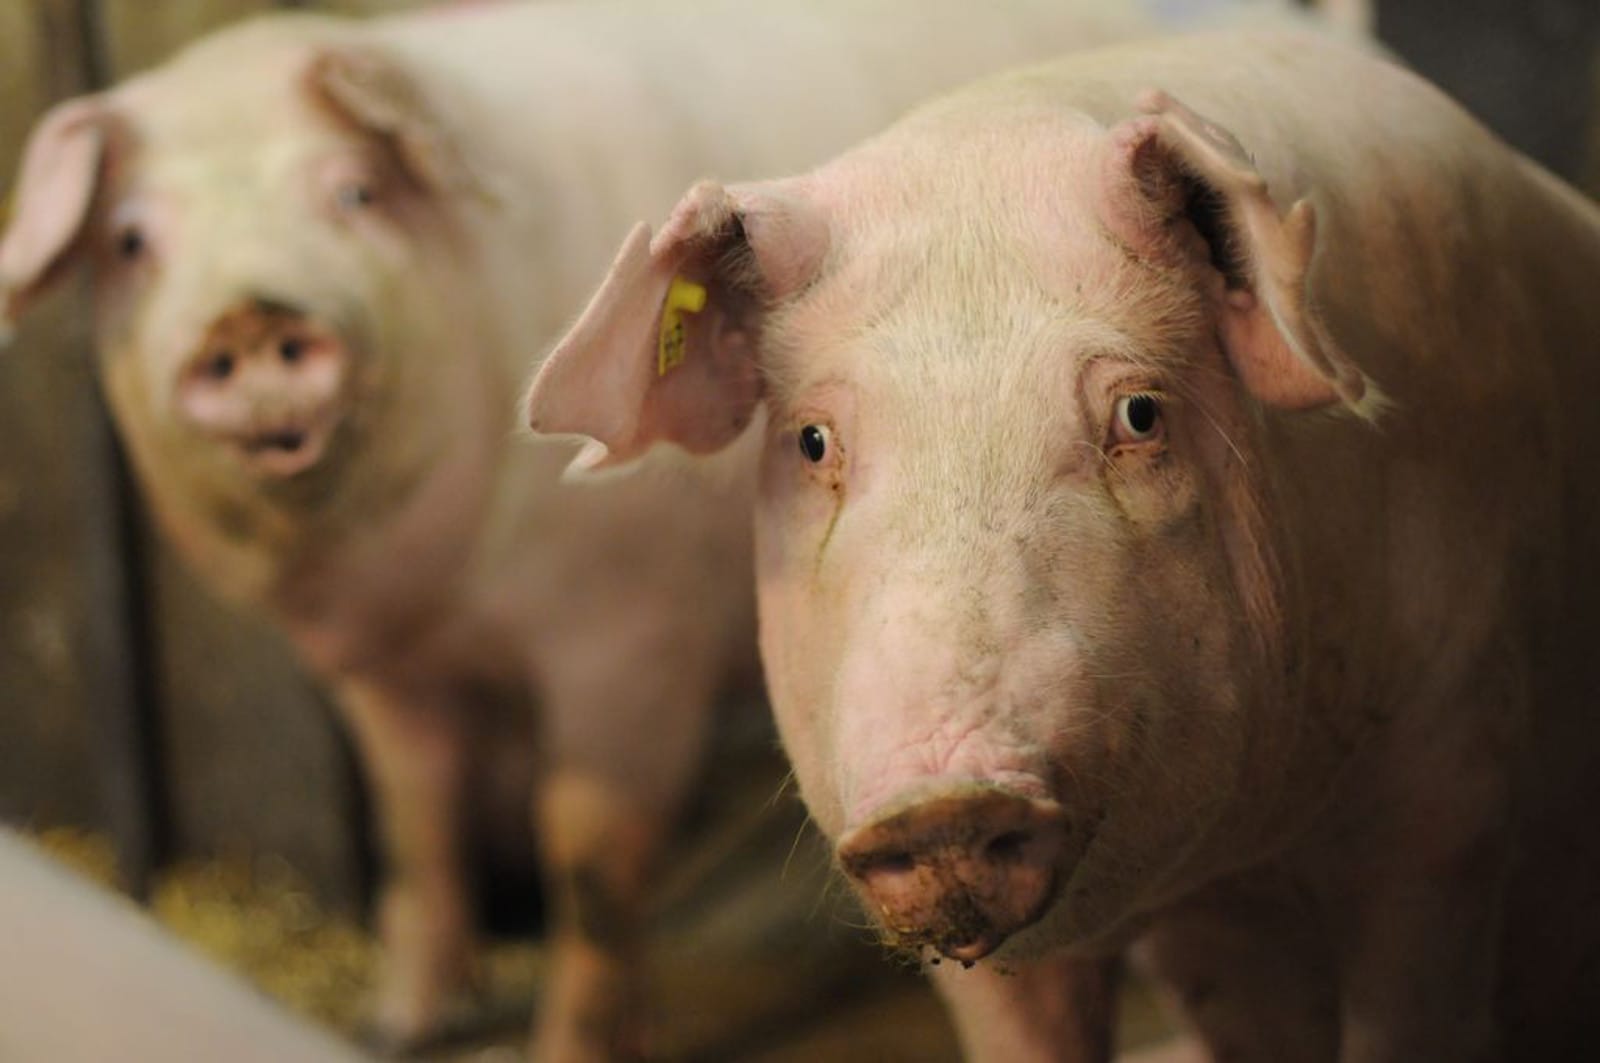 5 Powerful Videos on Factory Farming without the Gore